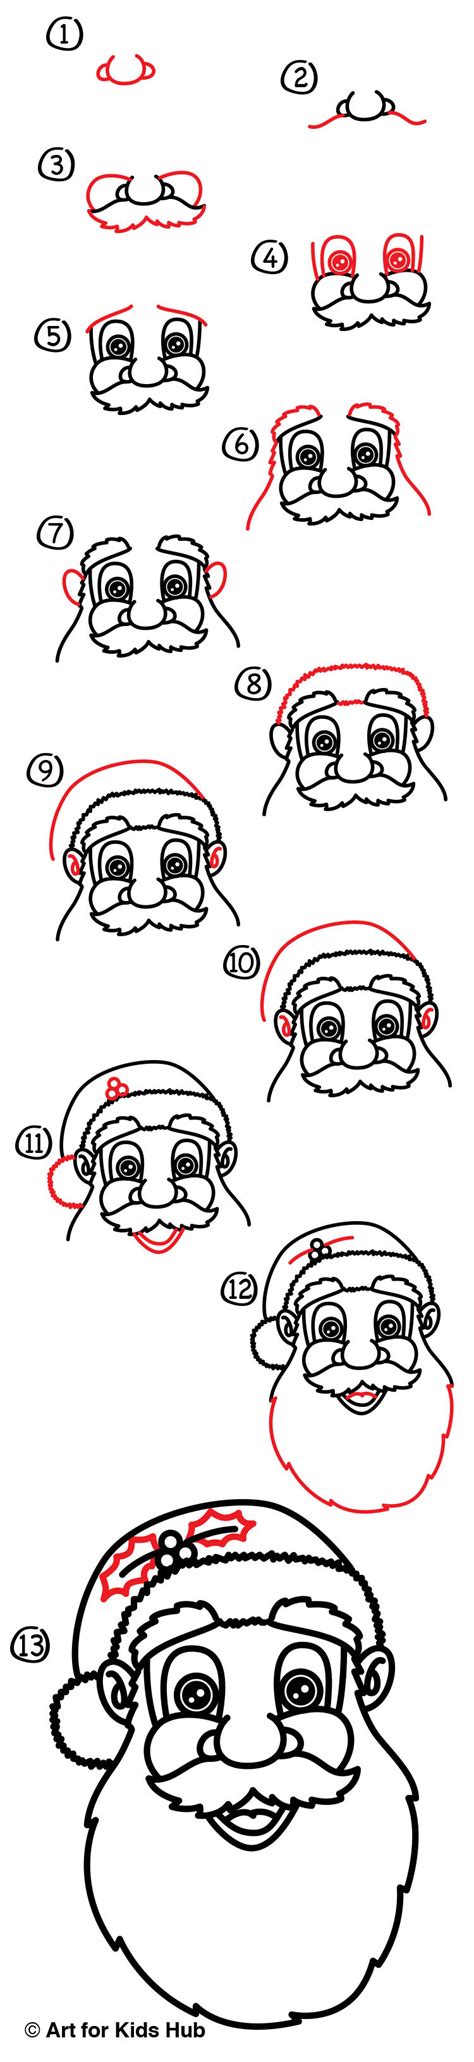 This step by step male head and face drawing tutorial explains how to draw and proportion a male head and face with clear guidelines and illustrated examples for each step. How To Draw Santa Claus's Face - Art For Kids Hub